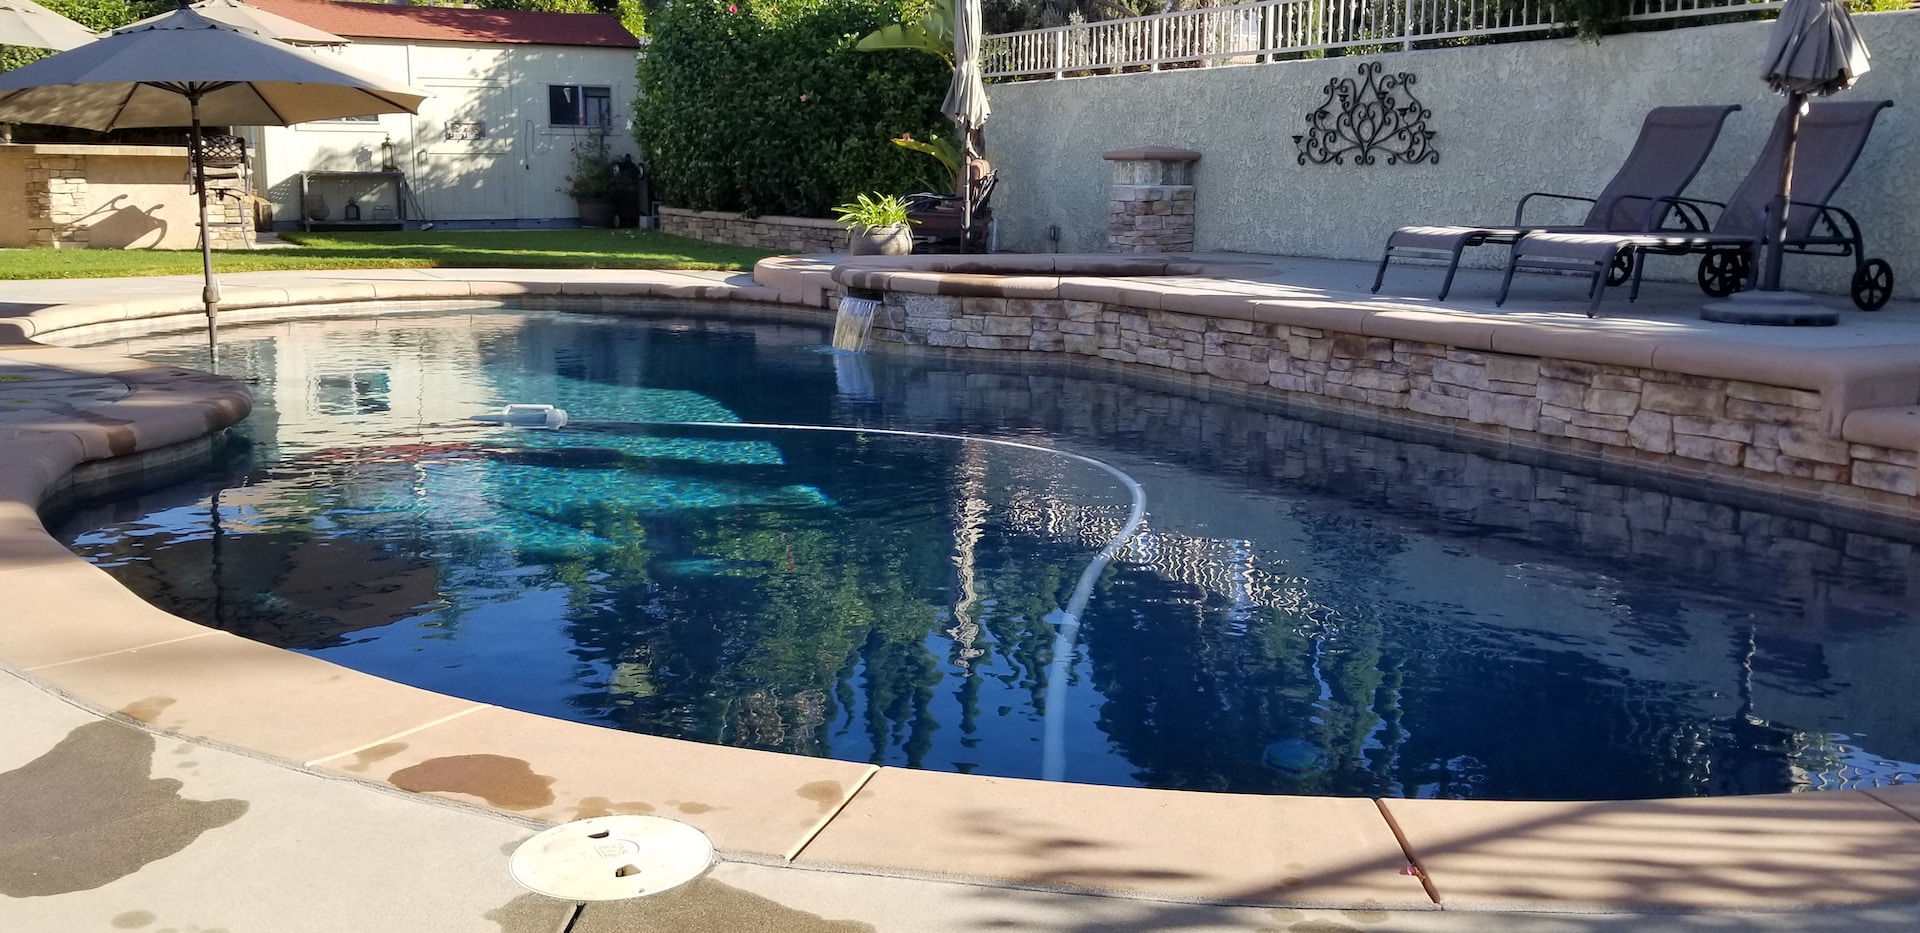 Home with swimming pool in Upland, CA, USA